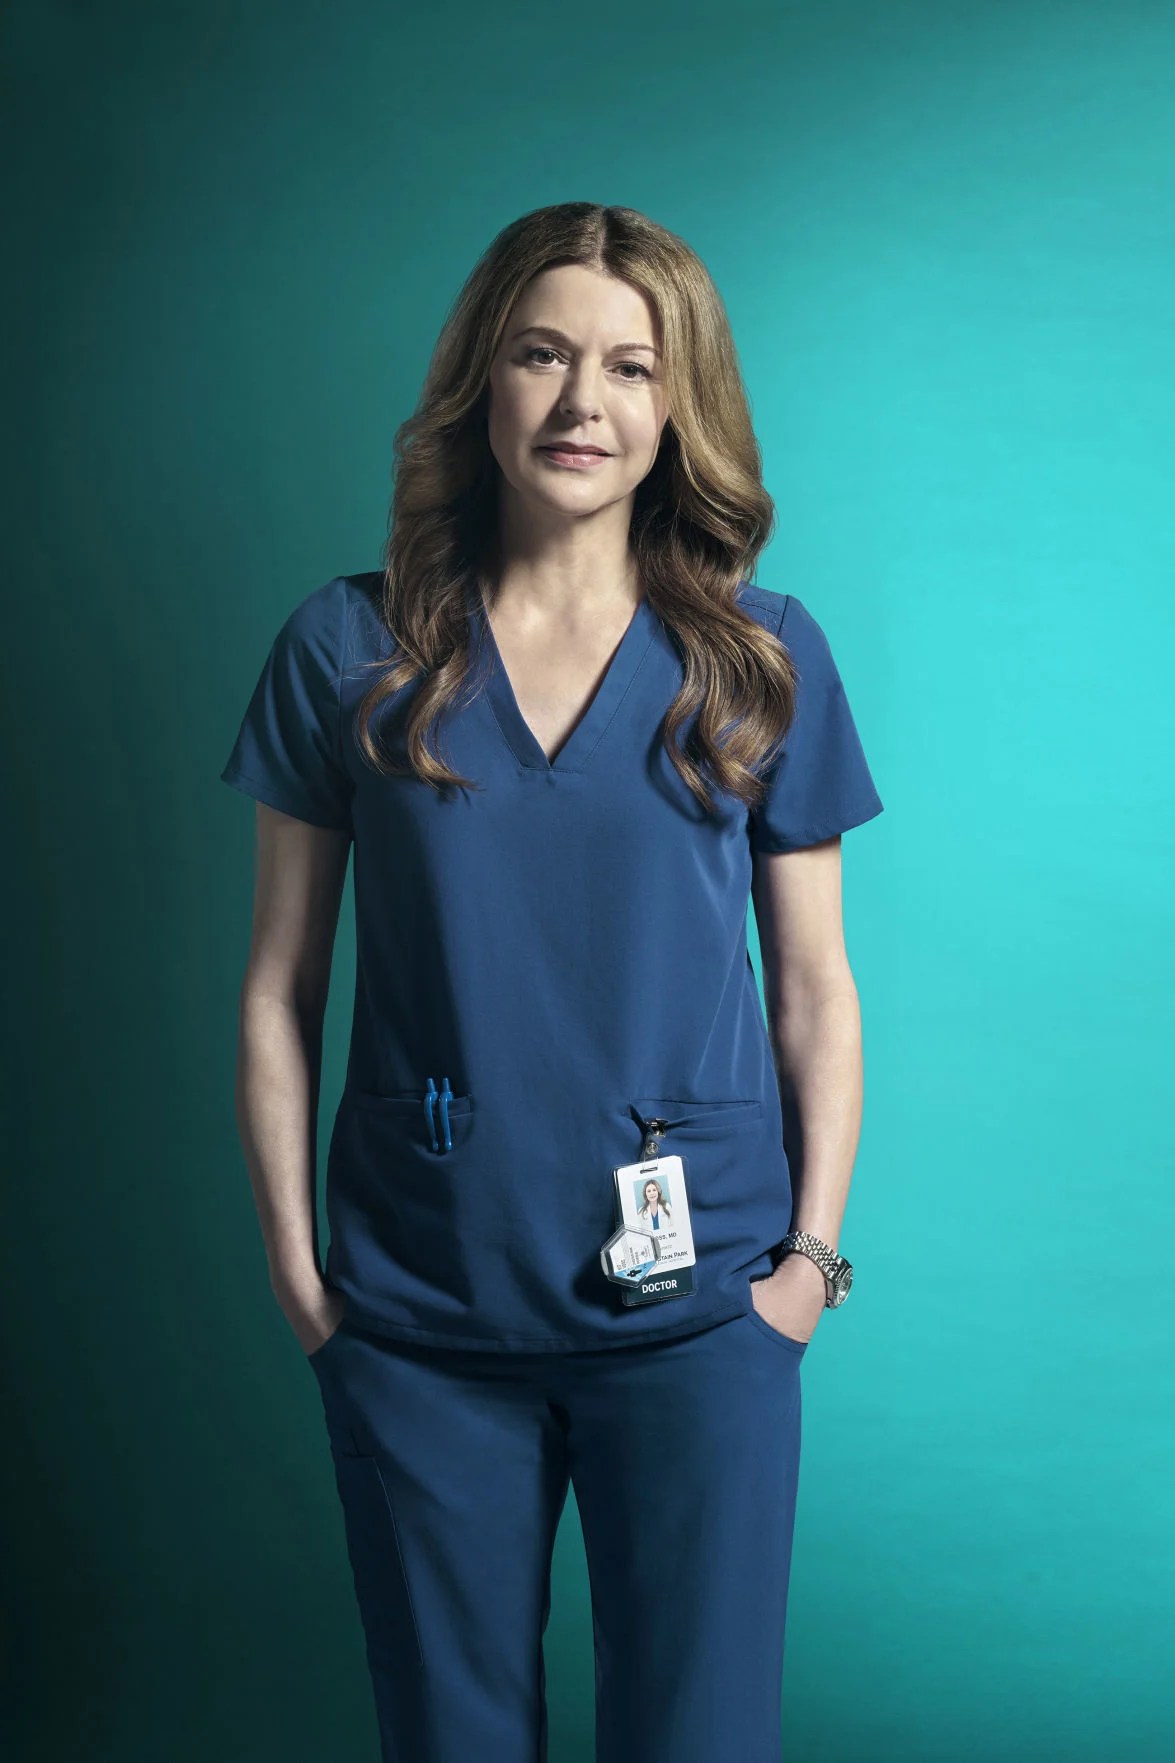 Jane Leeves hasn't abandoned comedy for 'The Resident' Television